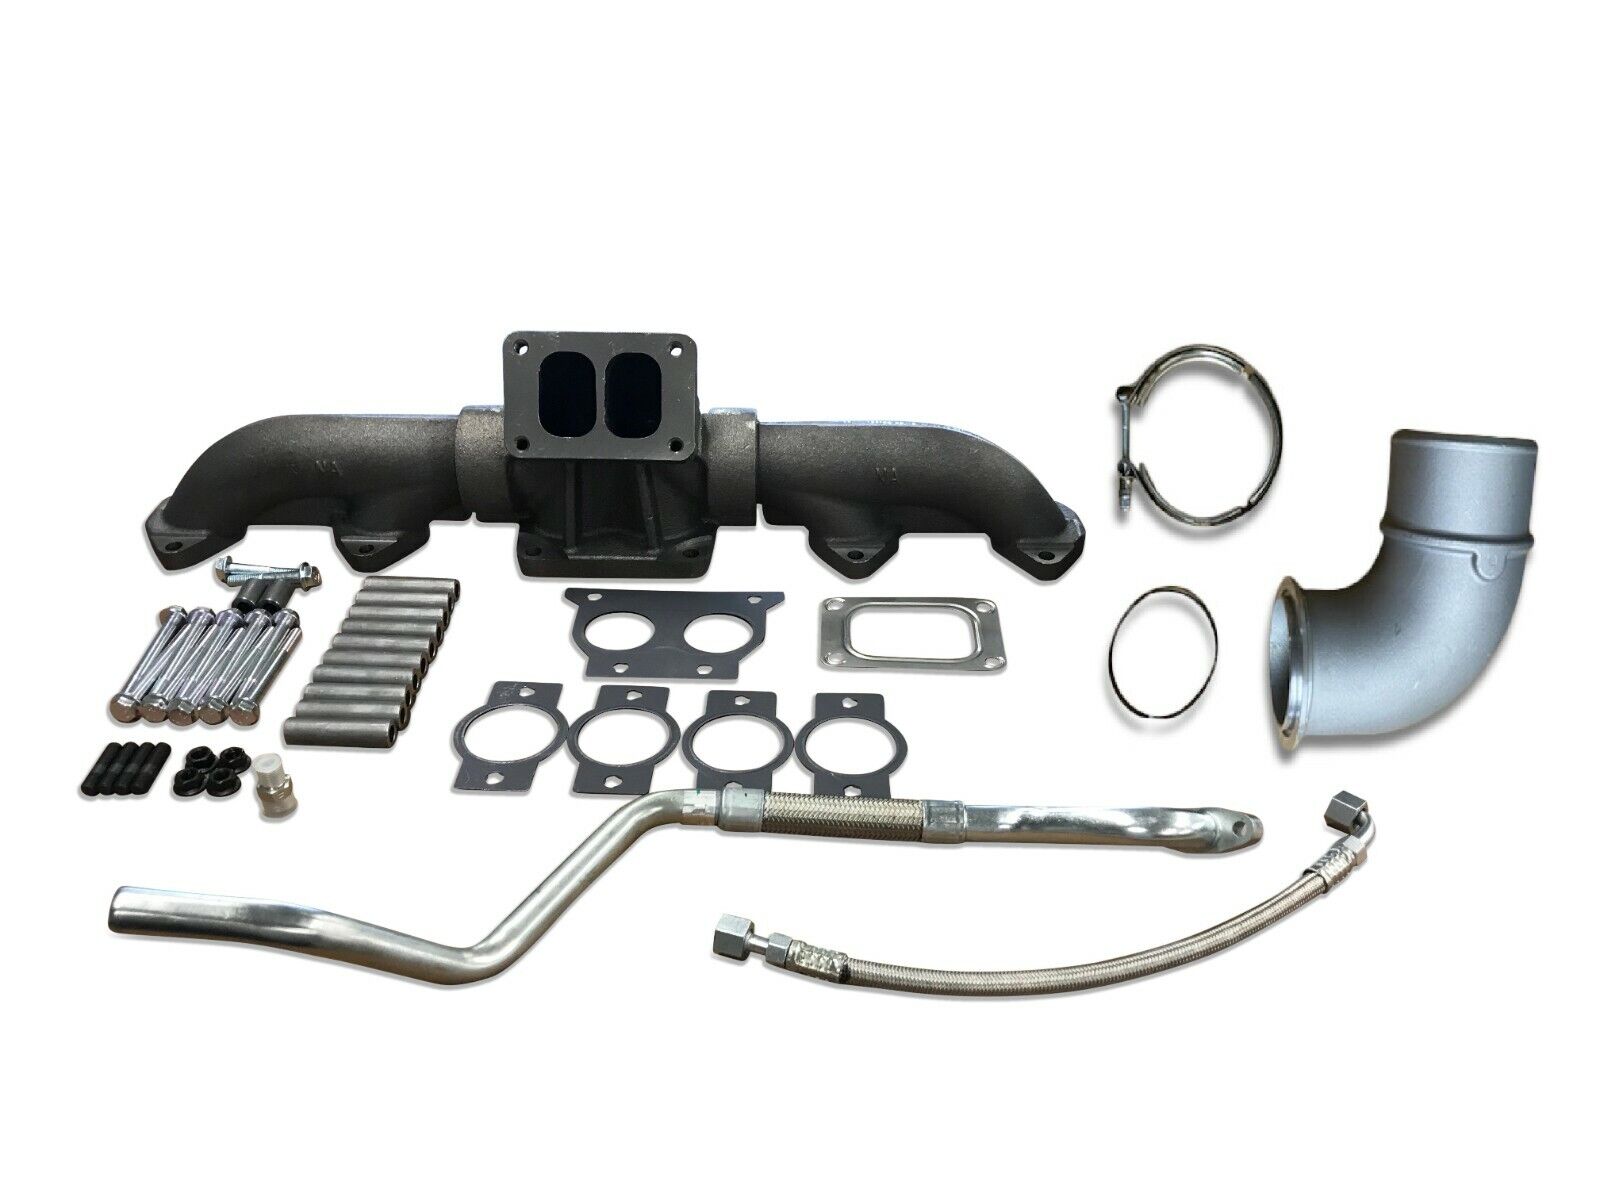 Complete New Aftermarket Exhaust For ISX 570 With T6 Flange, Plus 3682674 Elbow